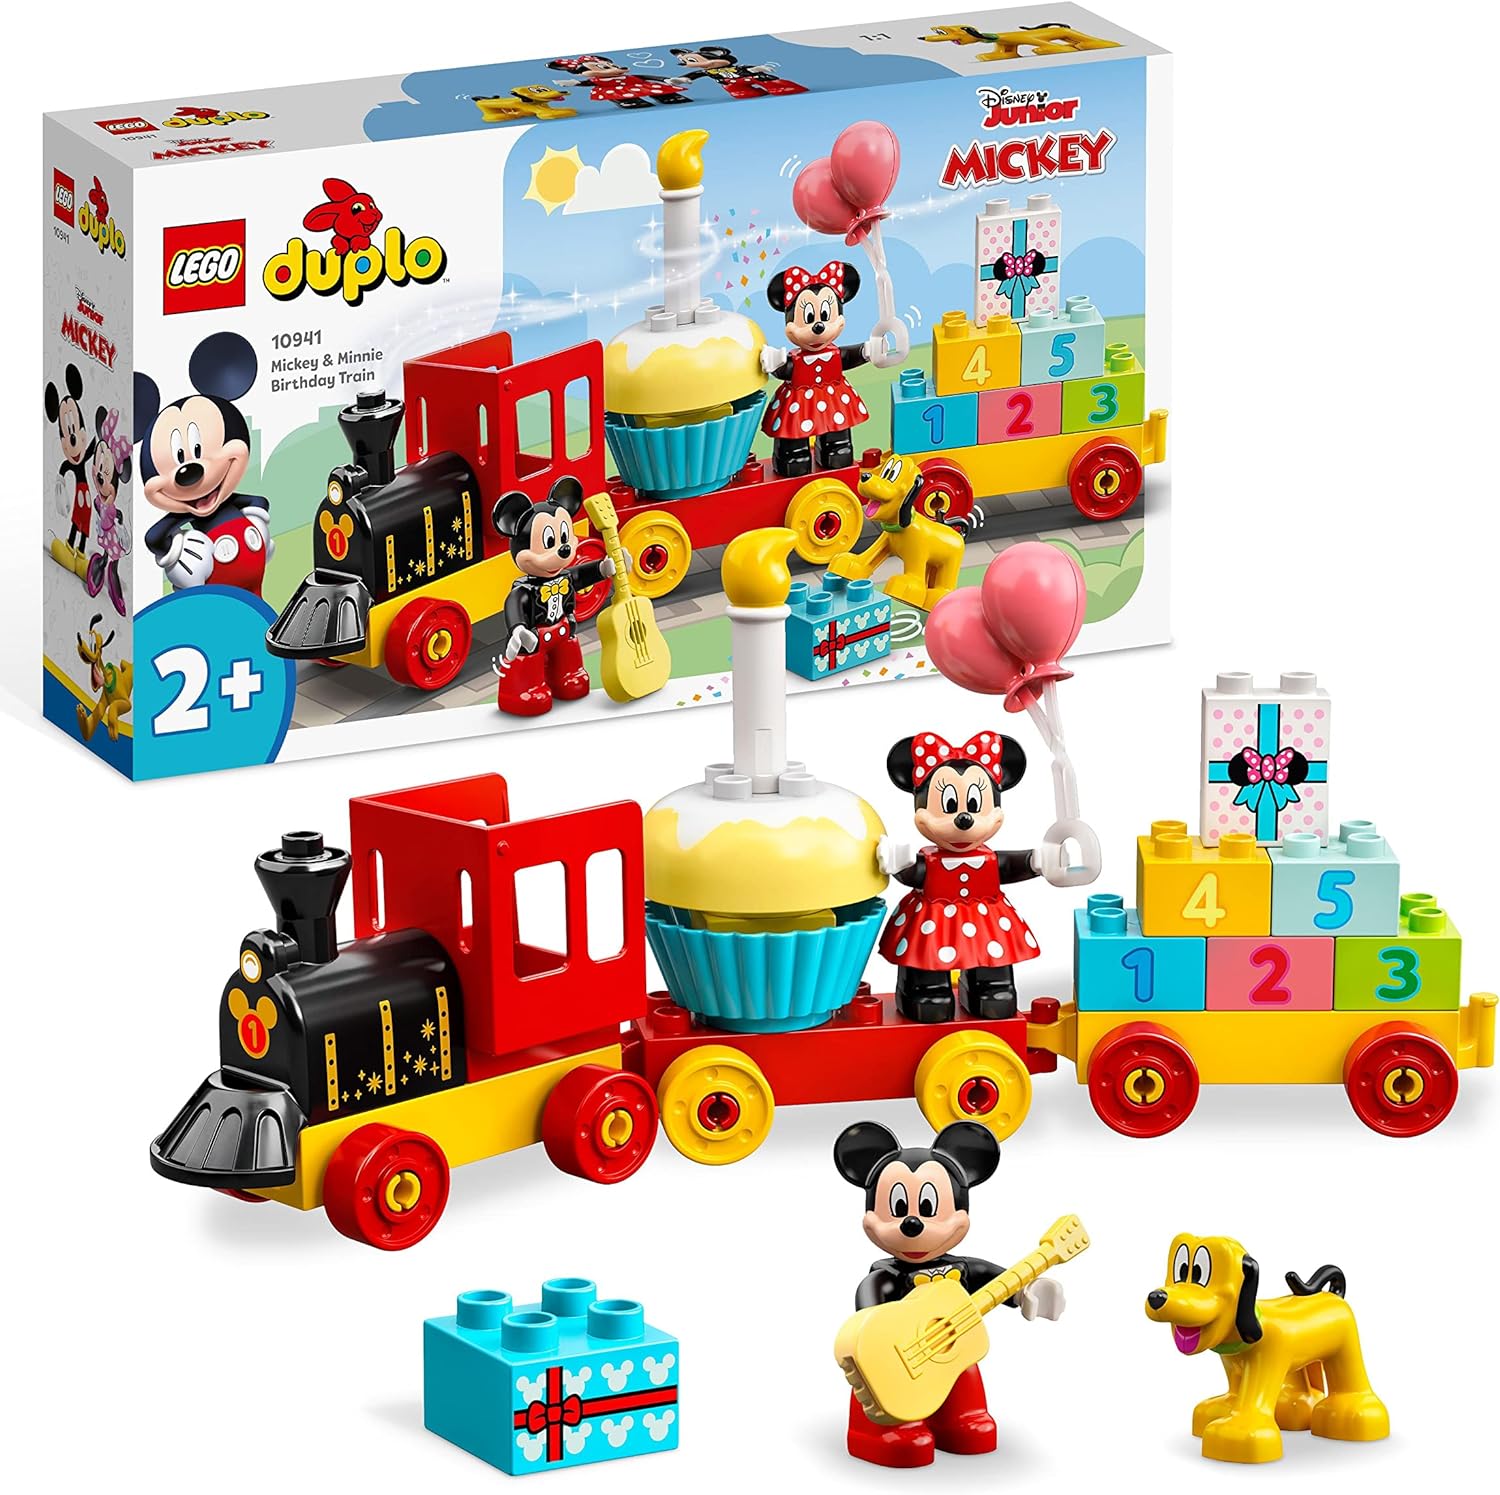 LEGO 10941 DUPLO Disney Mickey and Minnie's Birthday Train, Train Toy with Cake and Balloons, includes Mickey and Minnie Mouse Figurines Gift for Toddlers, Girls and Boys, Ages 2+
Visit t